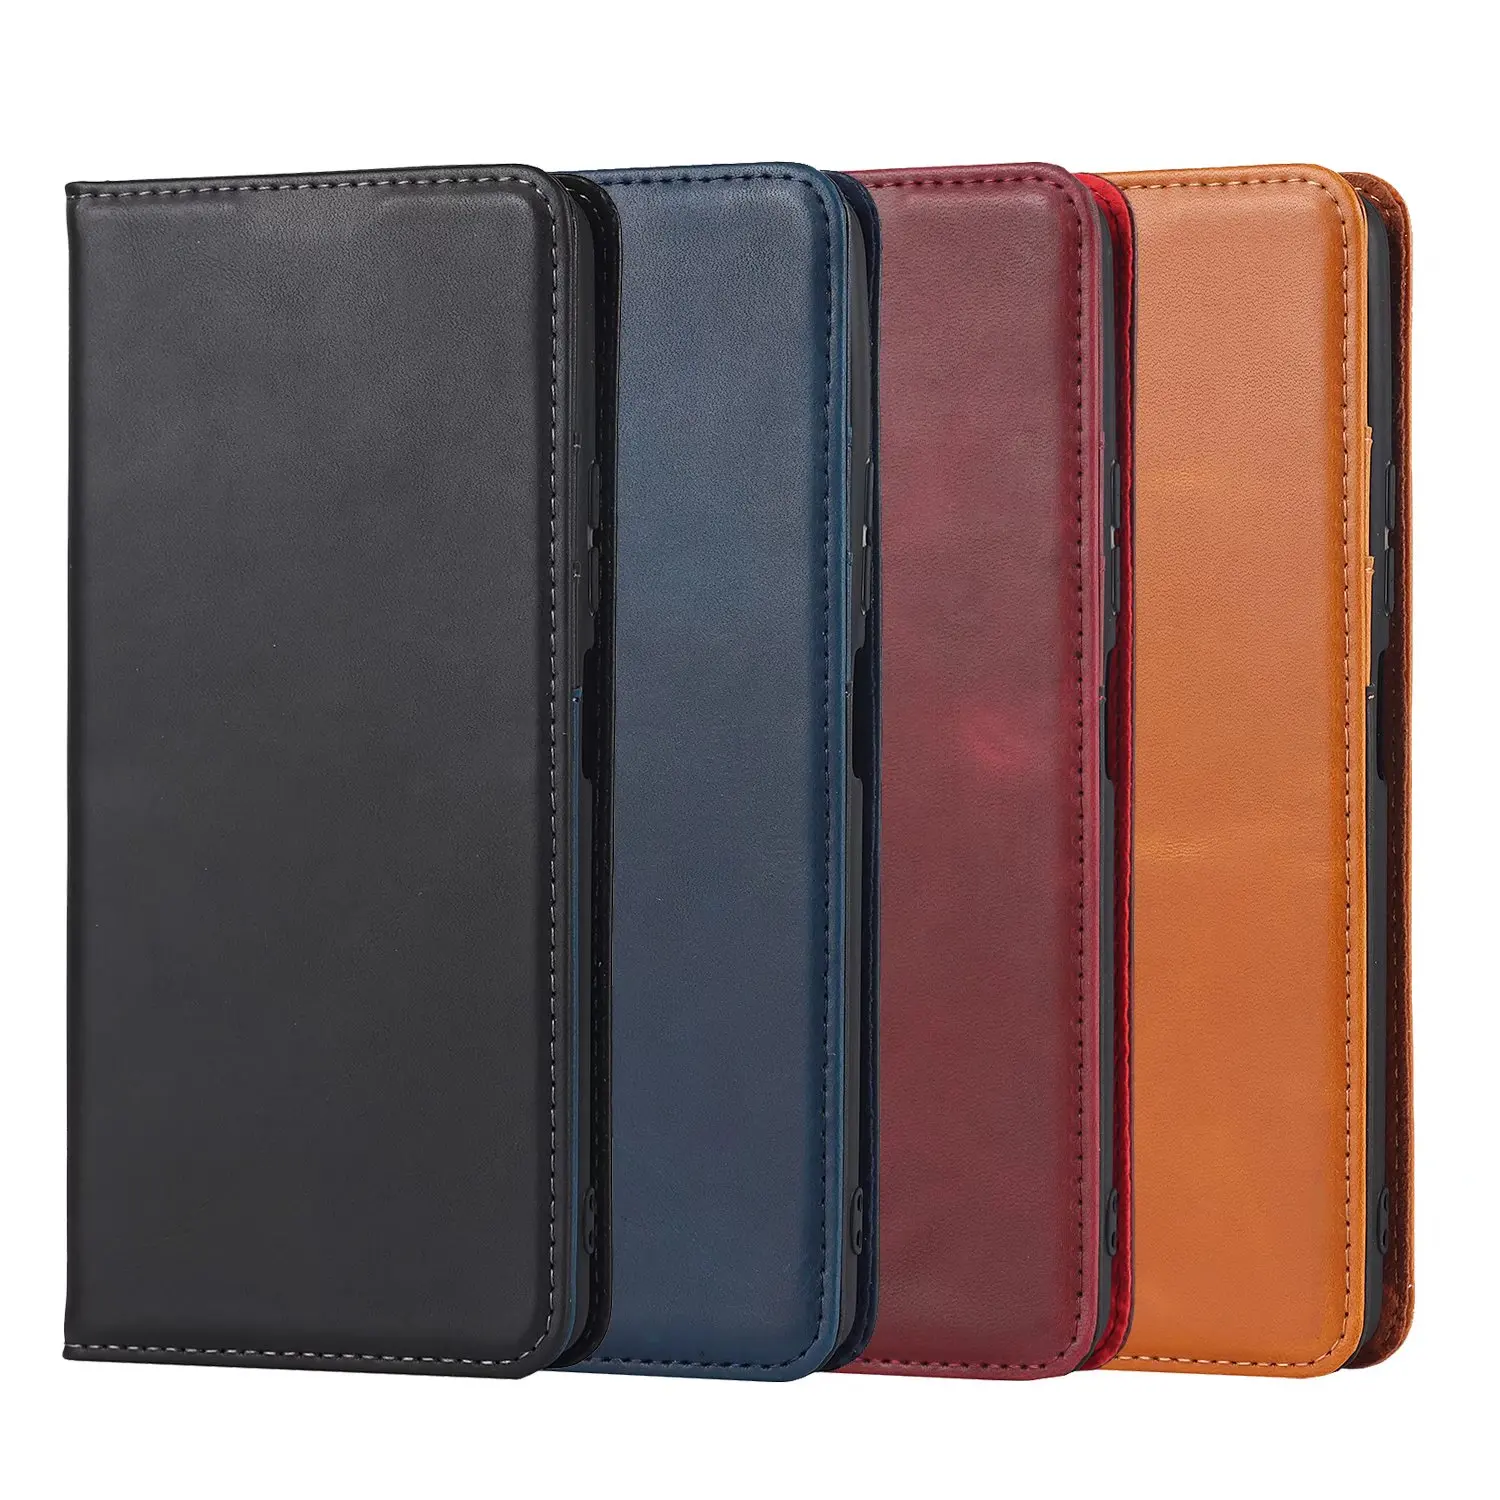 

Cowhide pattern PU Flip Wallet Case For XIAOMI Mi POCO X3 GT /Redmi NOTE 10 PRO 5G With Stand Card Slots, As pictures